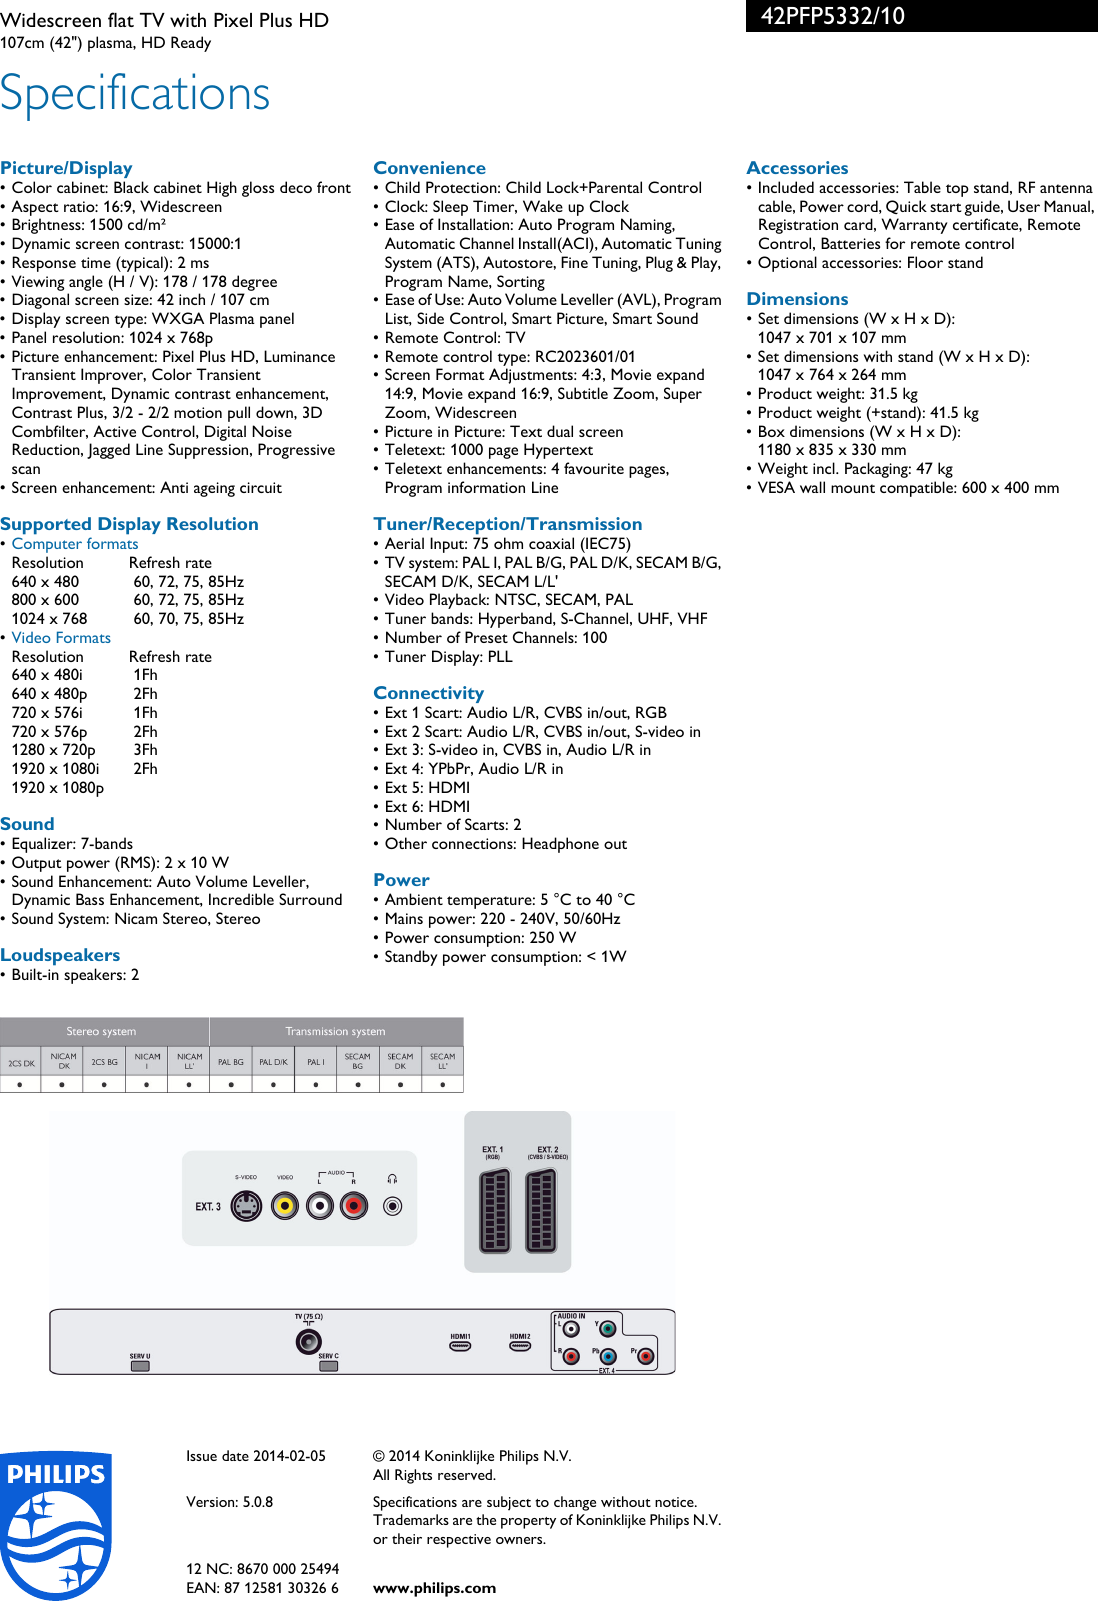 Page 3 of 3 - Philips 42PFP5332/10 Widescreen Flat TV With Pixel Plus HD User Manual Voldik 42pfp5332 10 Pss